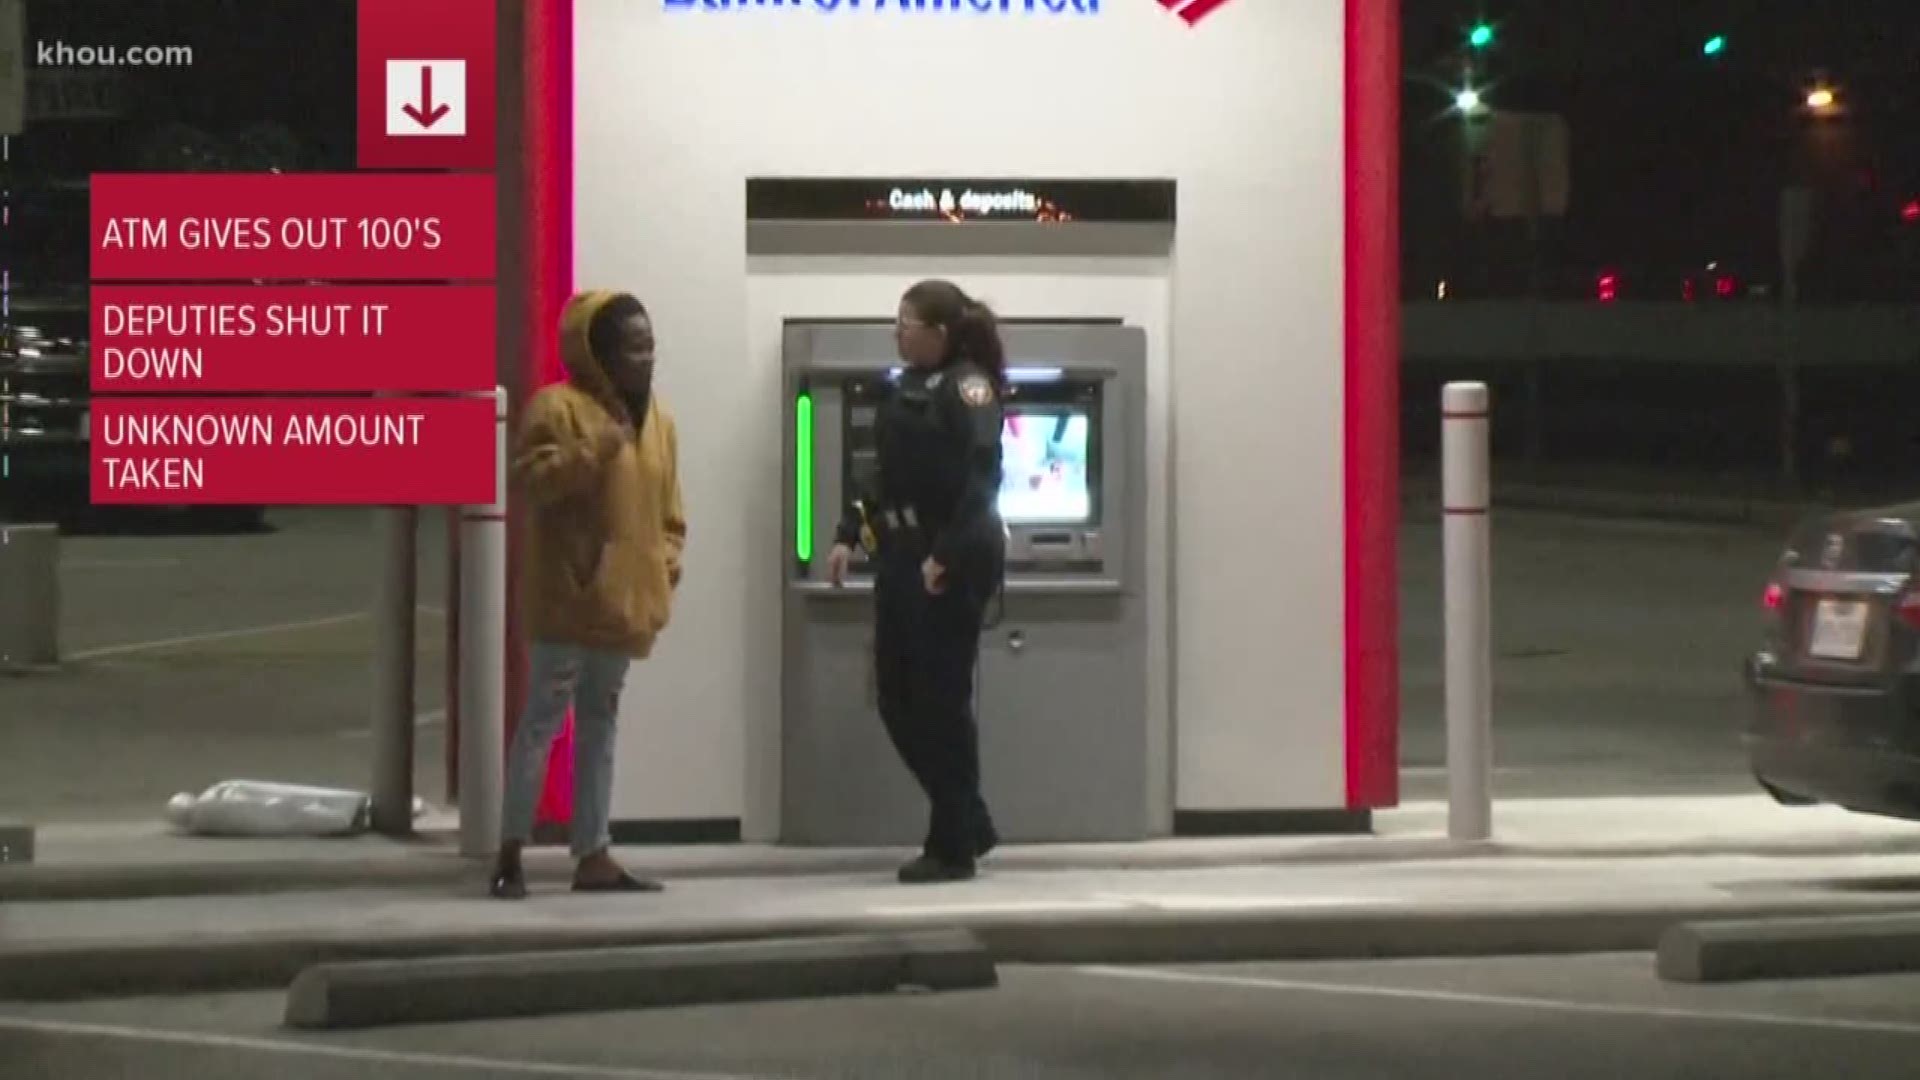 Deputies cleared a crowd surrounding an ATM after it started dispensing $100 bills due to a glitch overnight night.